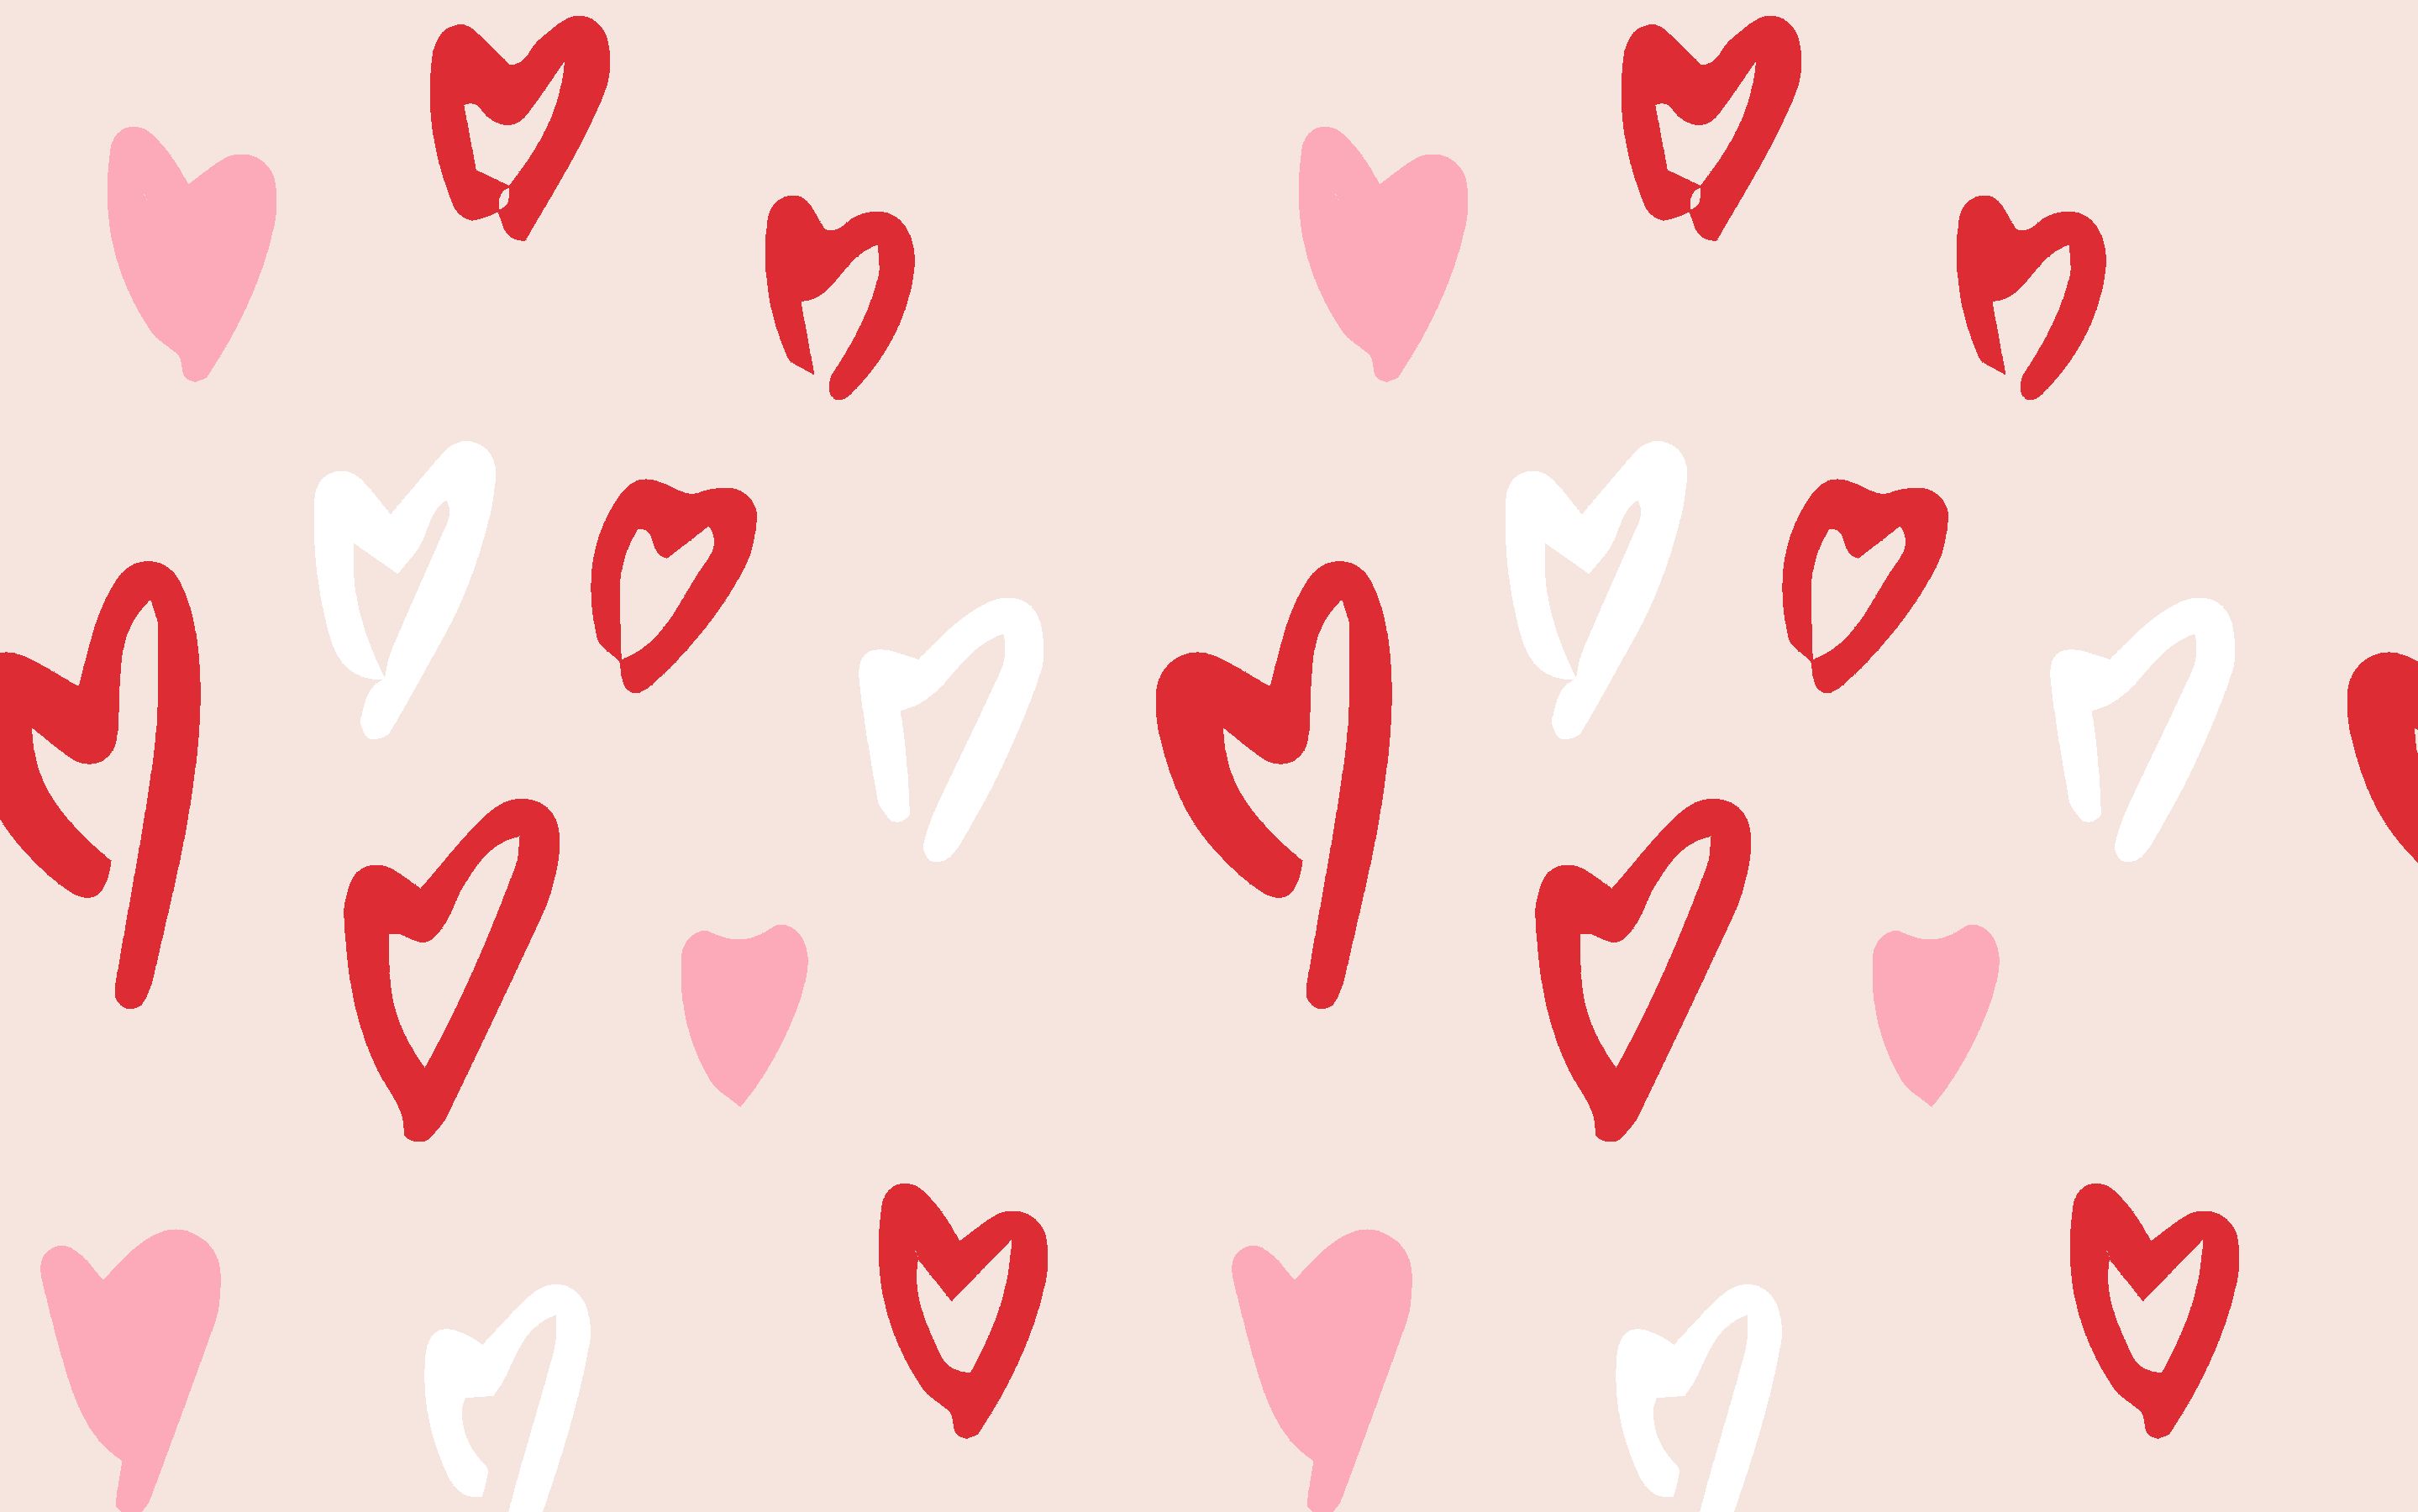 A pattern of red, pink, and white hearts on a pink background - Valentine's Day